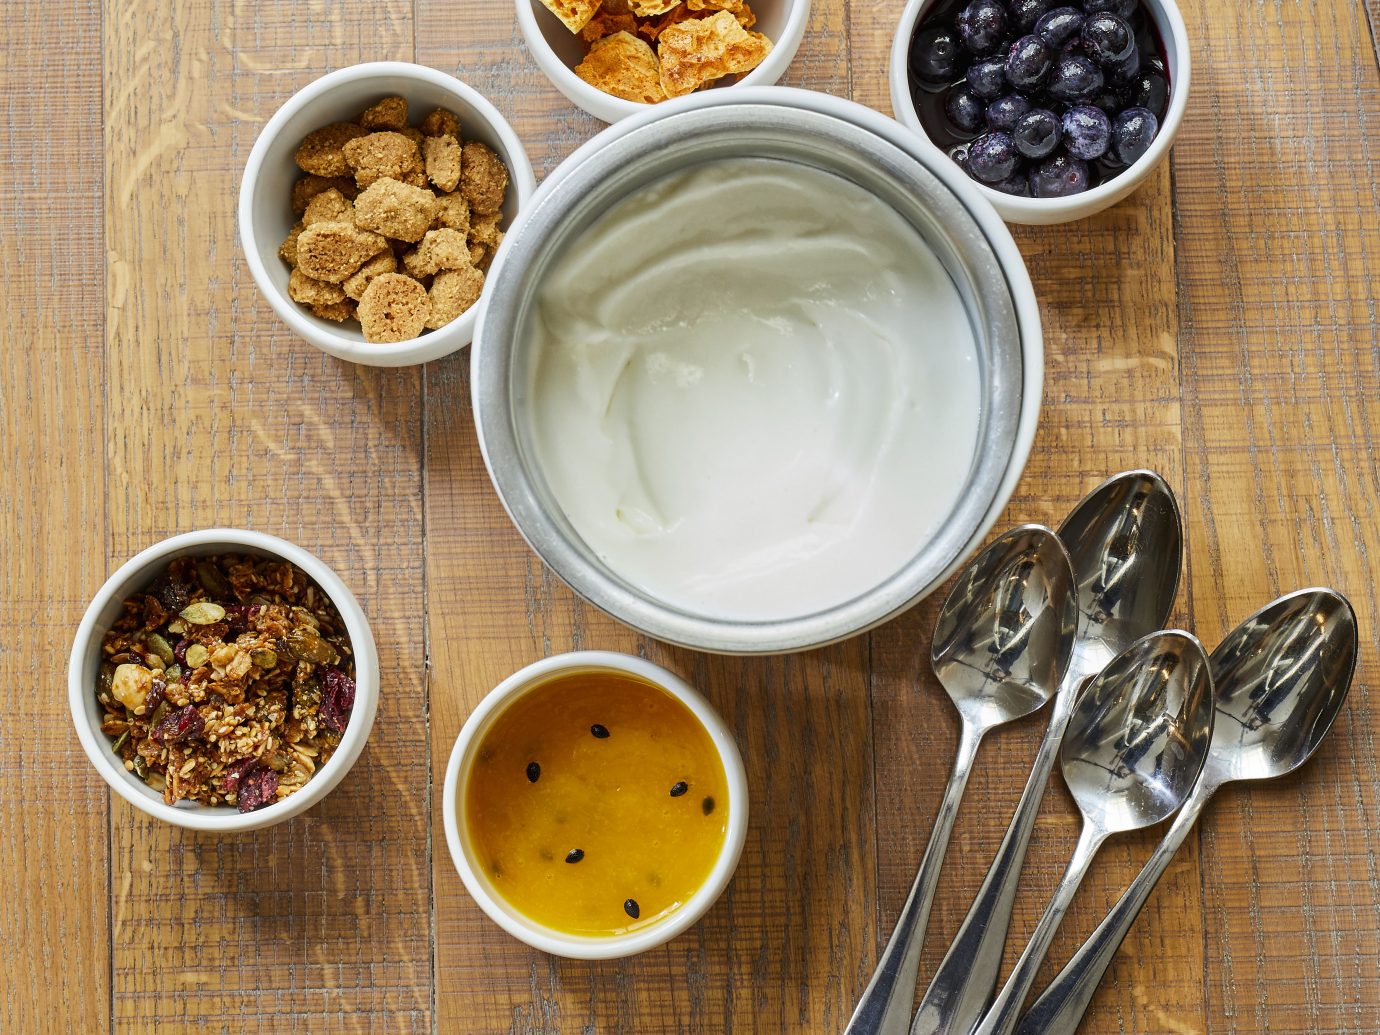 yogurt with numerous options in little bowls to put in it